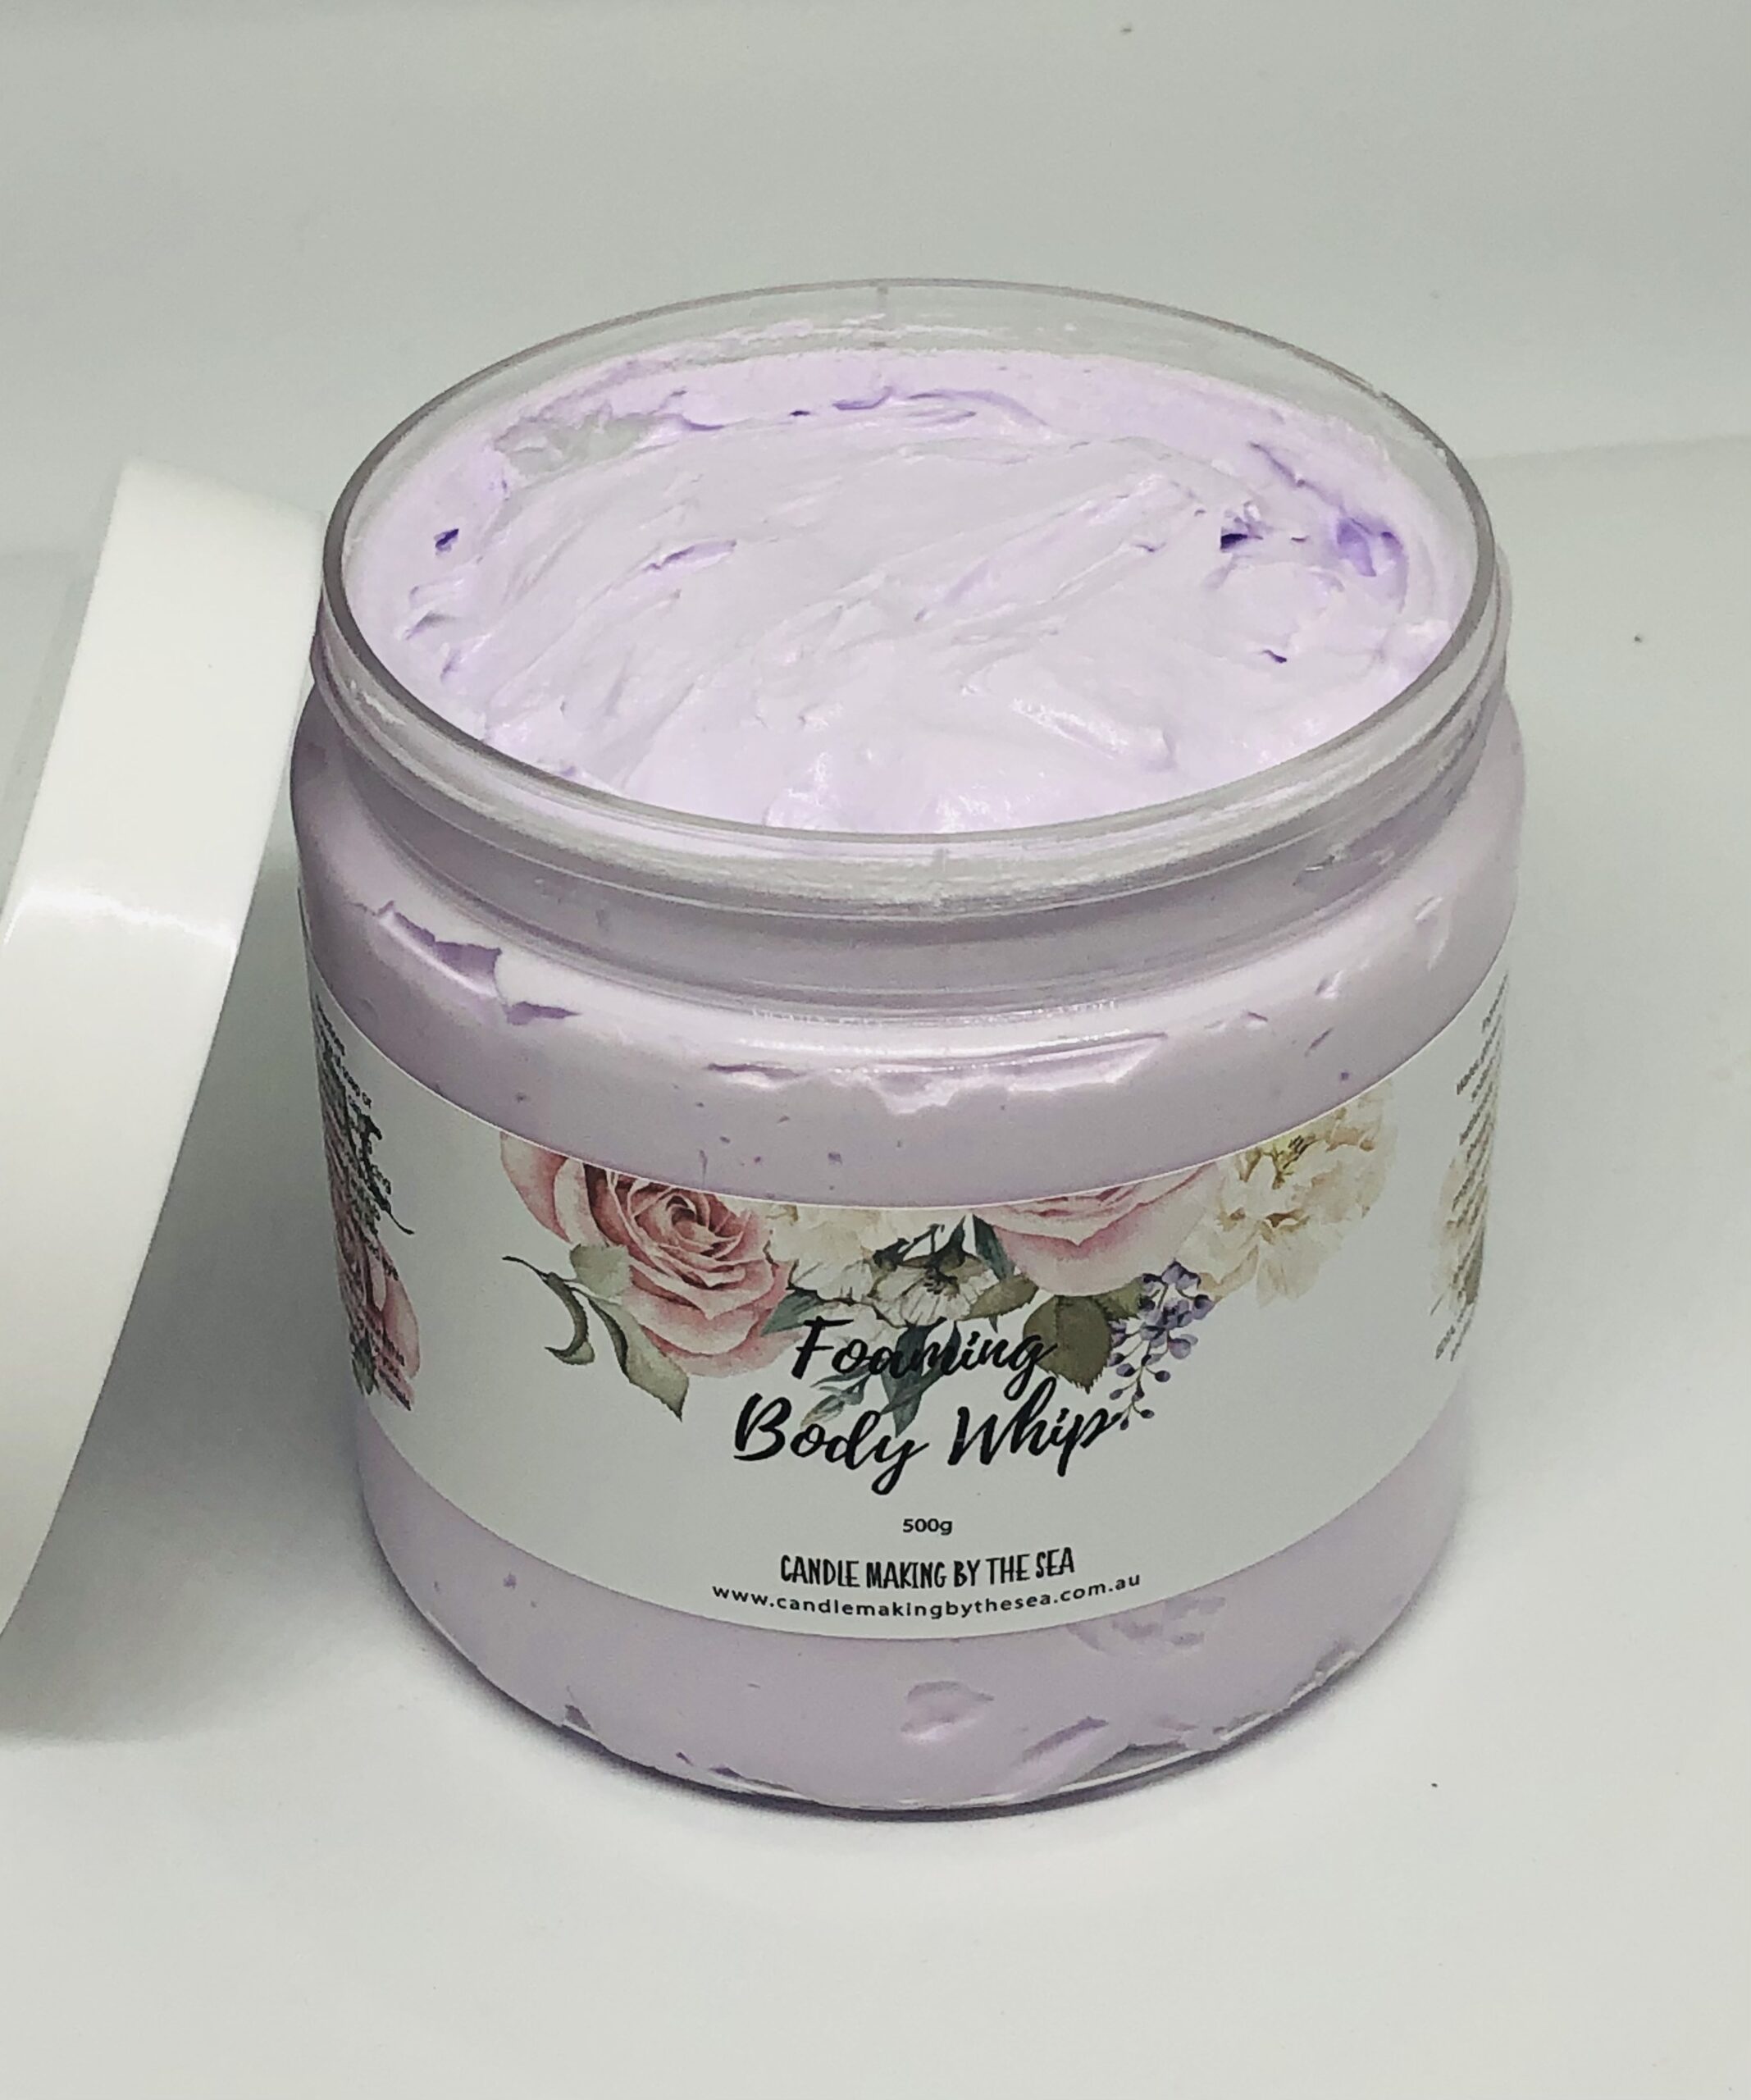 Foaming Body Whip (whipped soap)